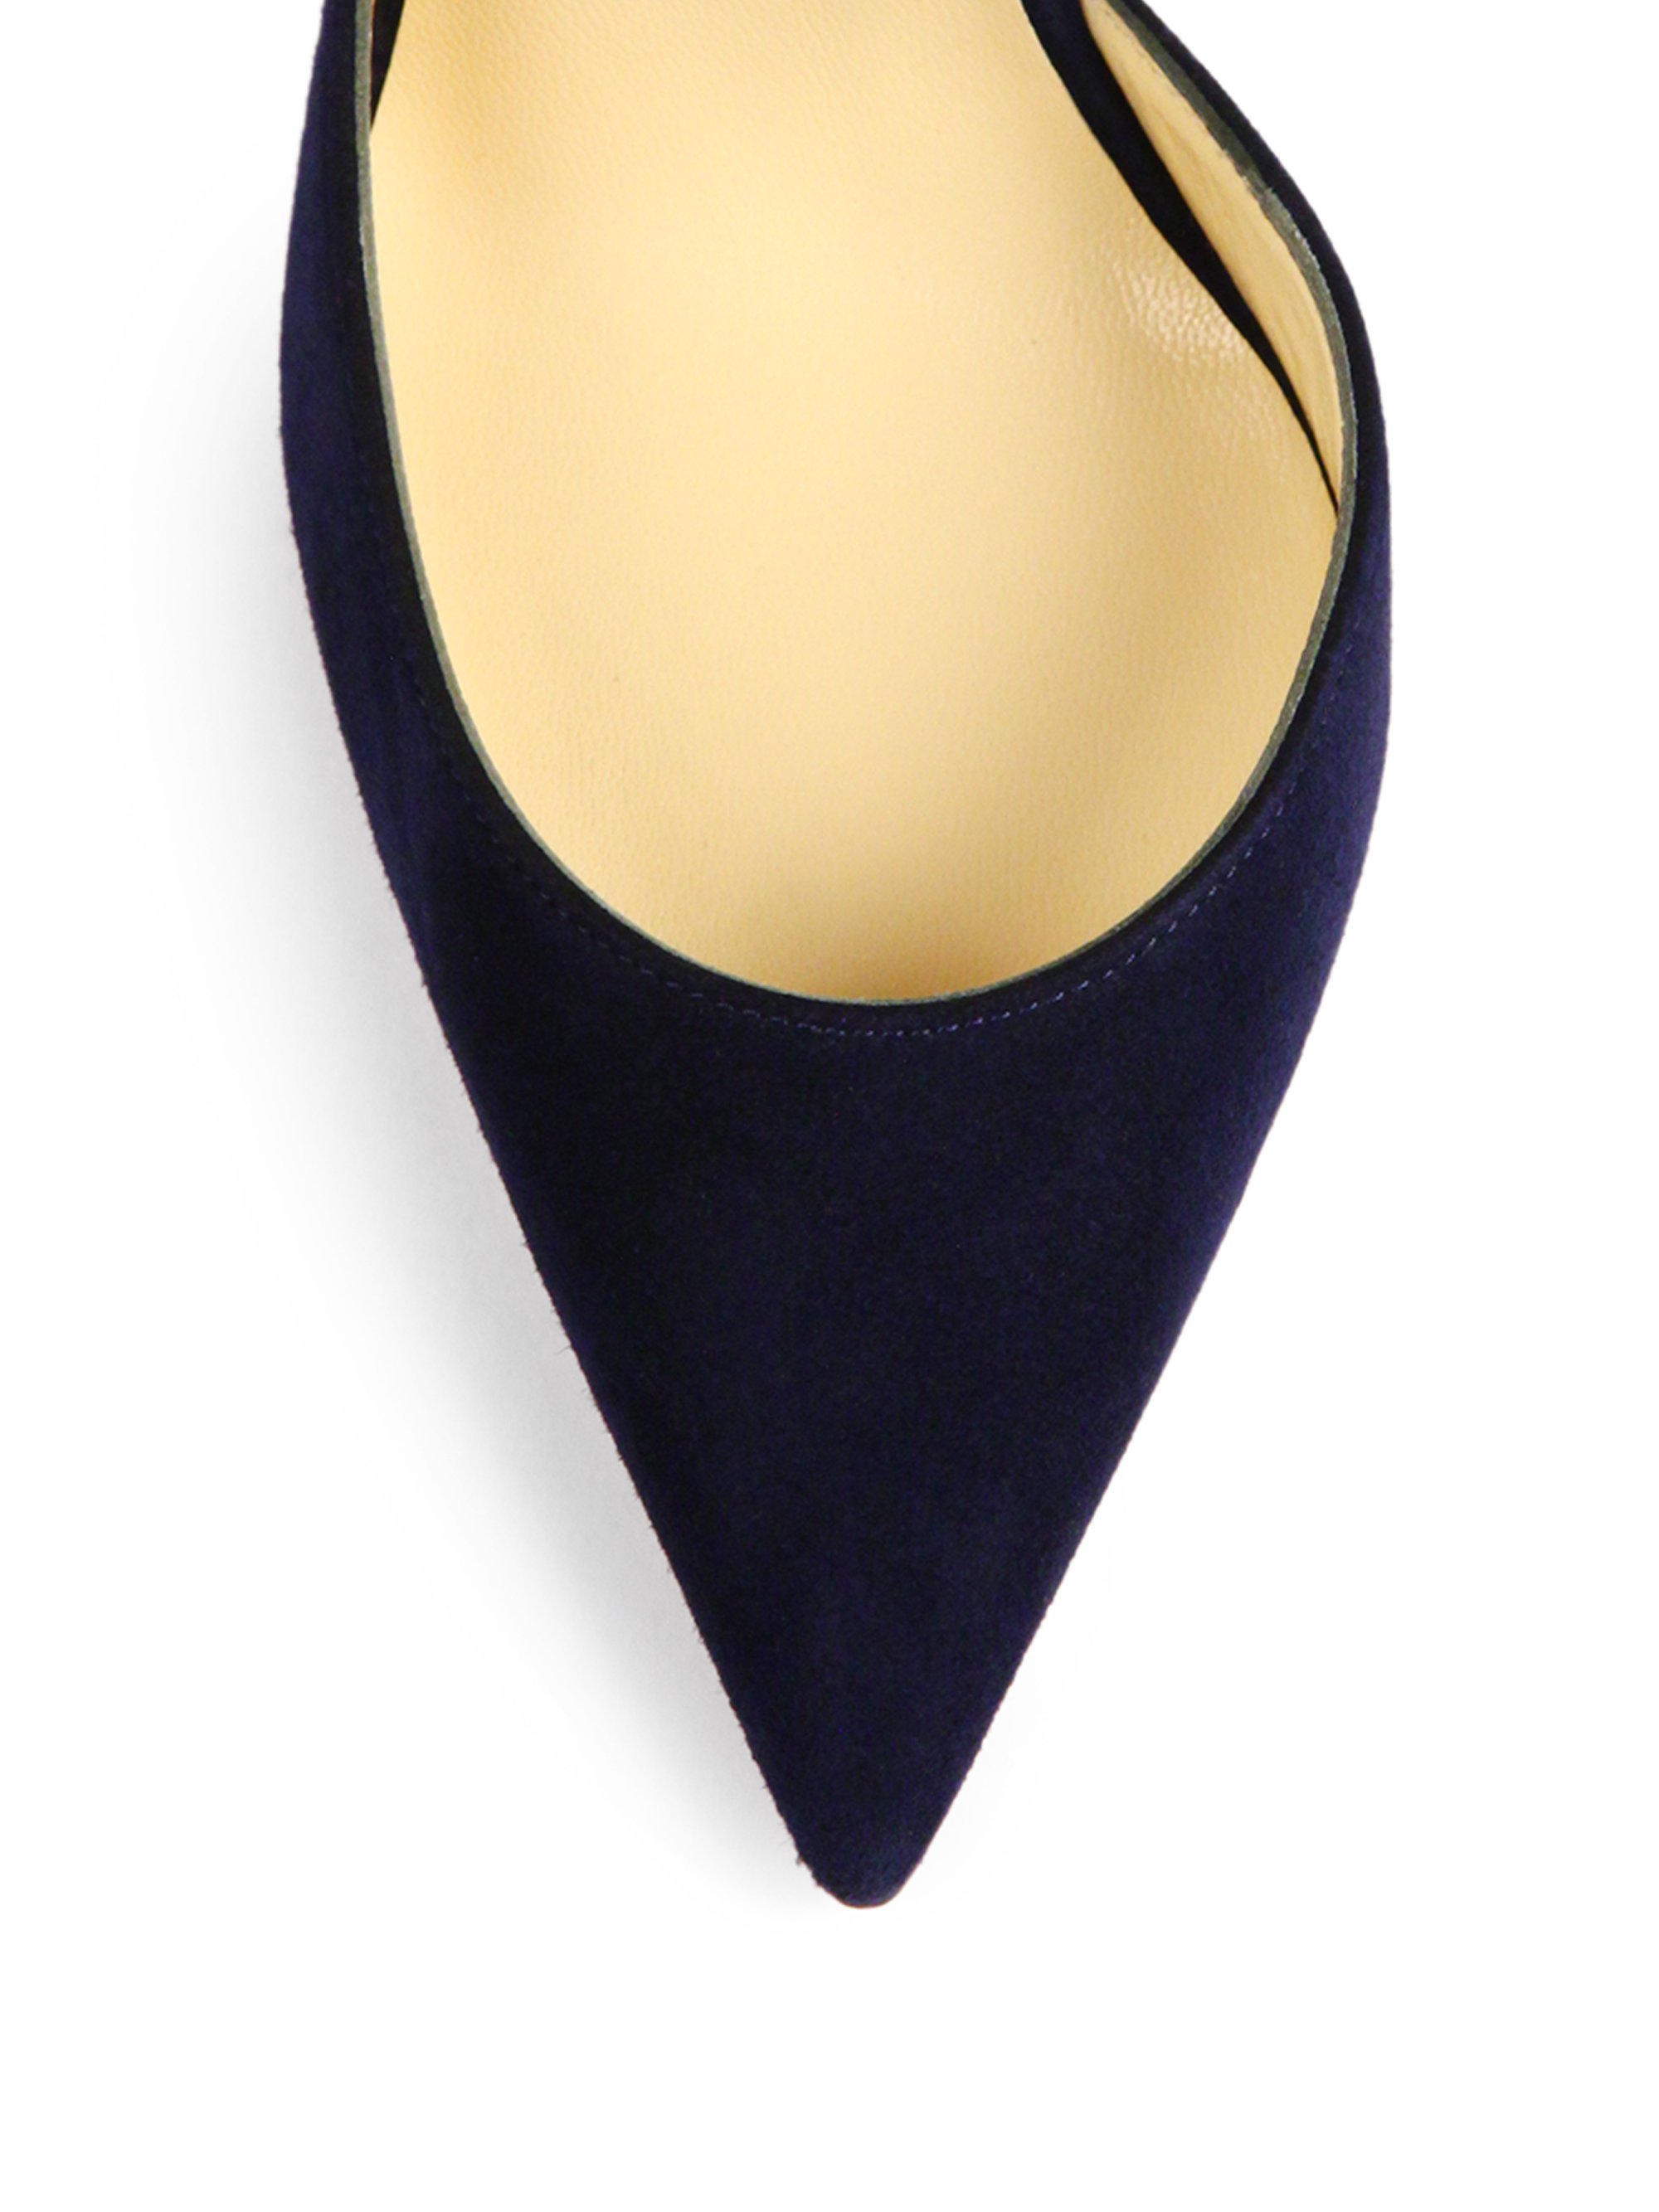 blue christian louboutin shoes - christian louboutin pointed-toe flats Black patent leather covered ...